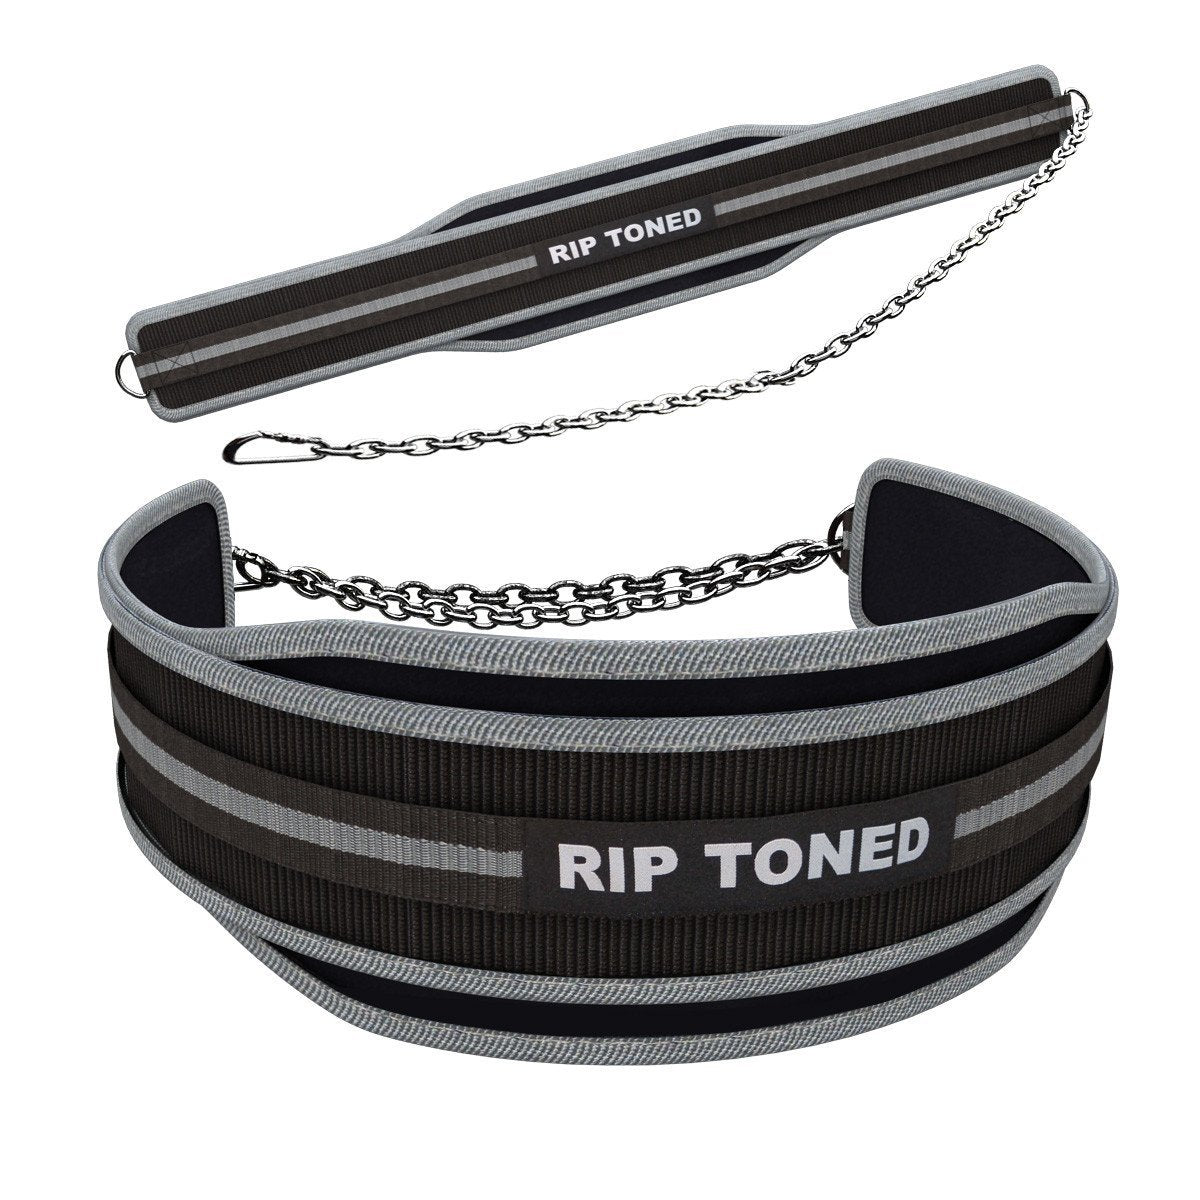  Rip Toned Dip Belt for Weight lifting, Pull Ups, Dips, Chin  Ups - 36 Heavy Duty Steel Chain - Weight Belt with Chain for Weight  Lifting, Powerlifting, and Strength Training 